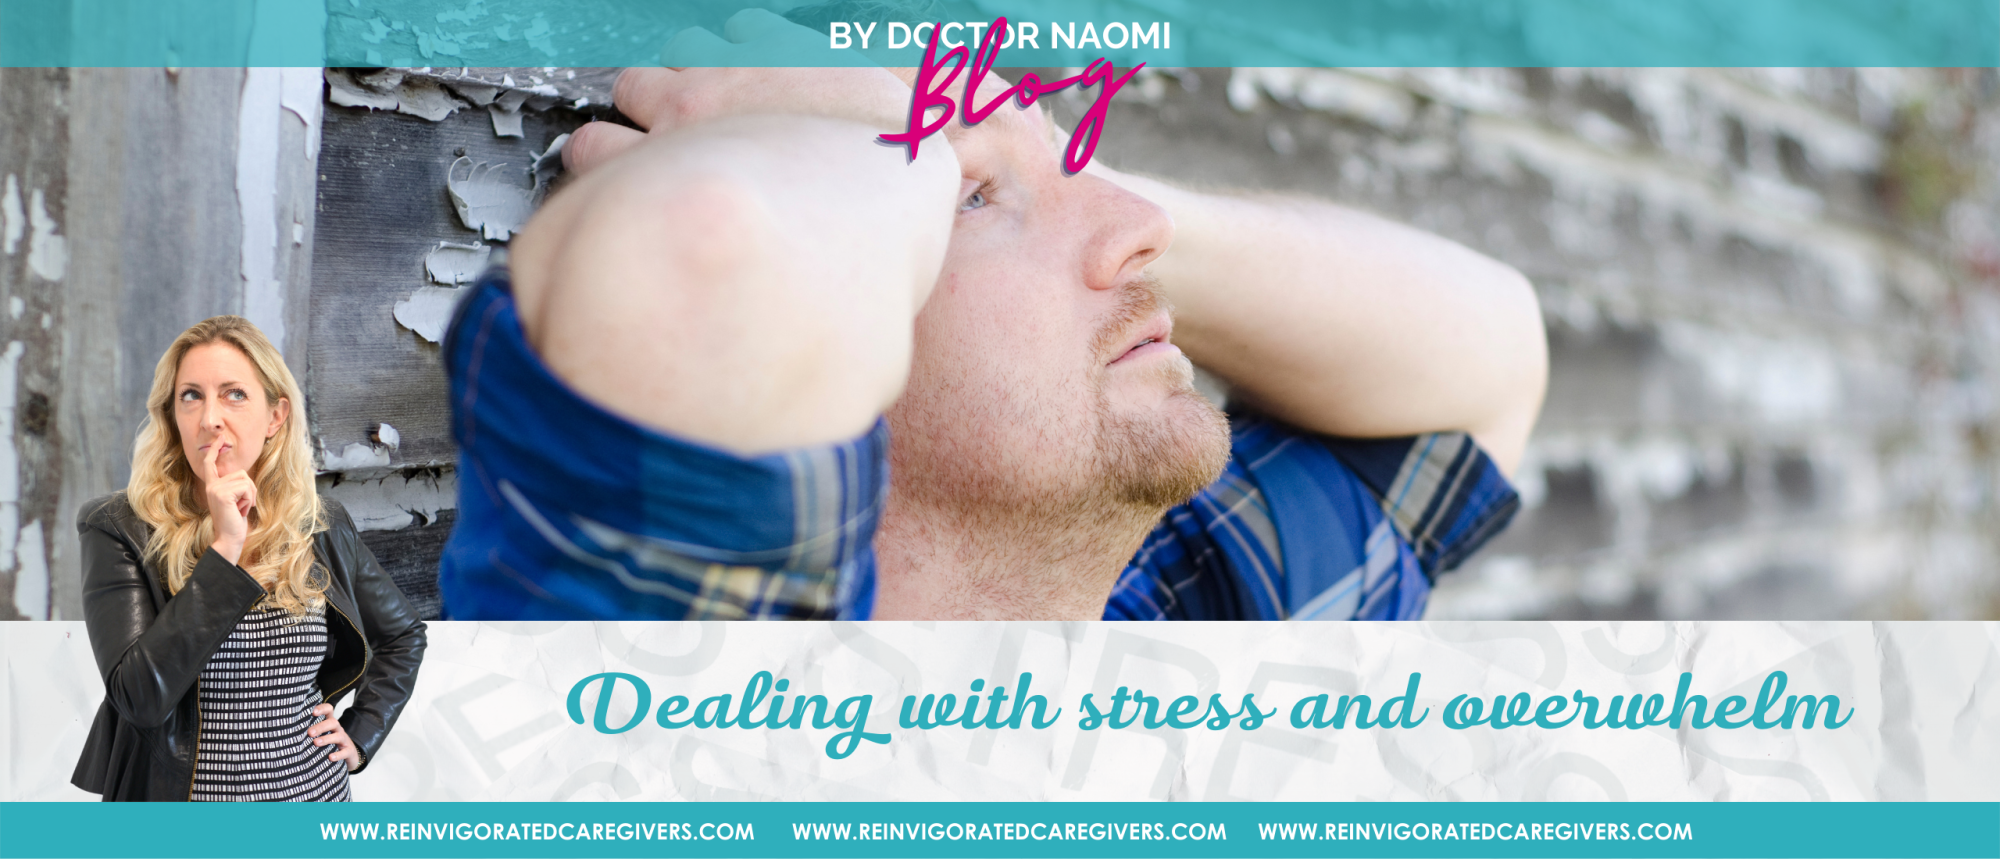 Blog Dealing with stress and overwhelm